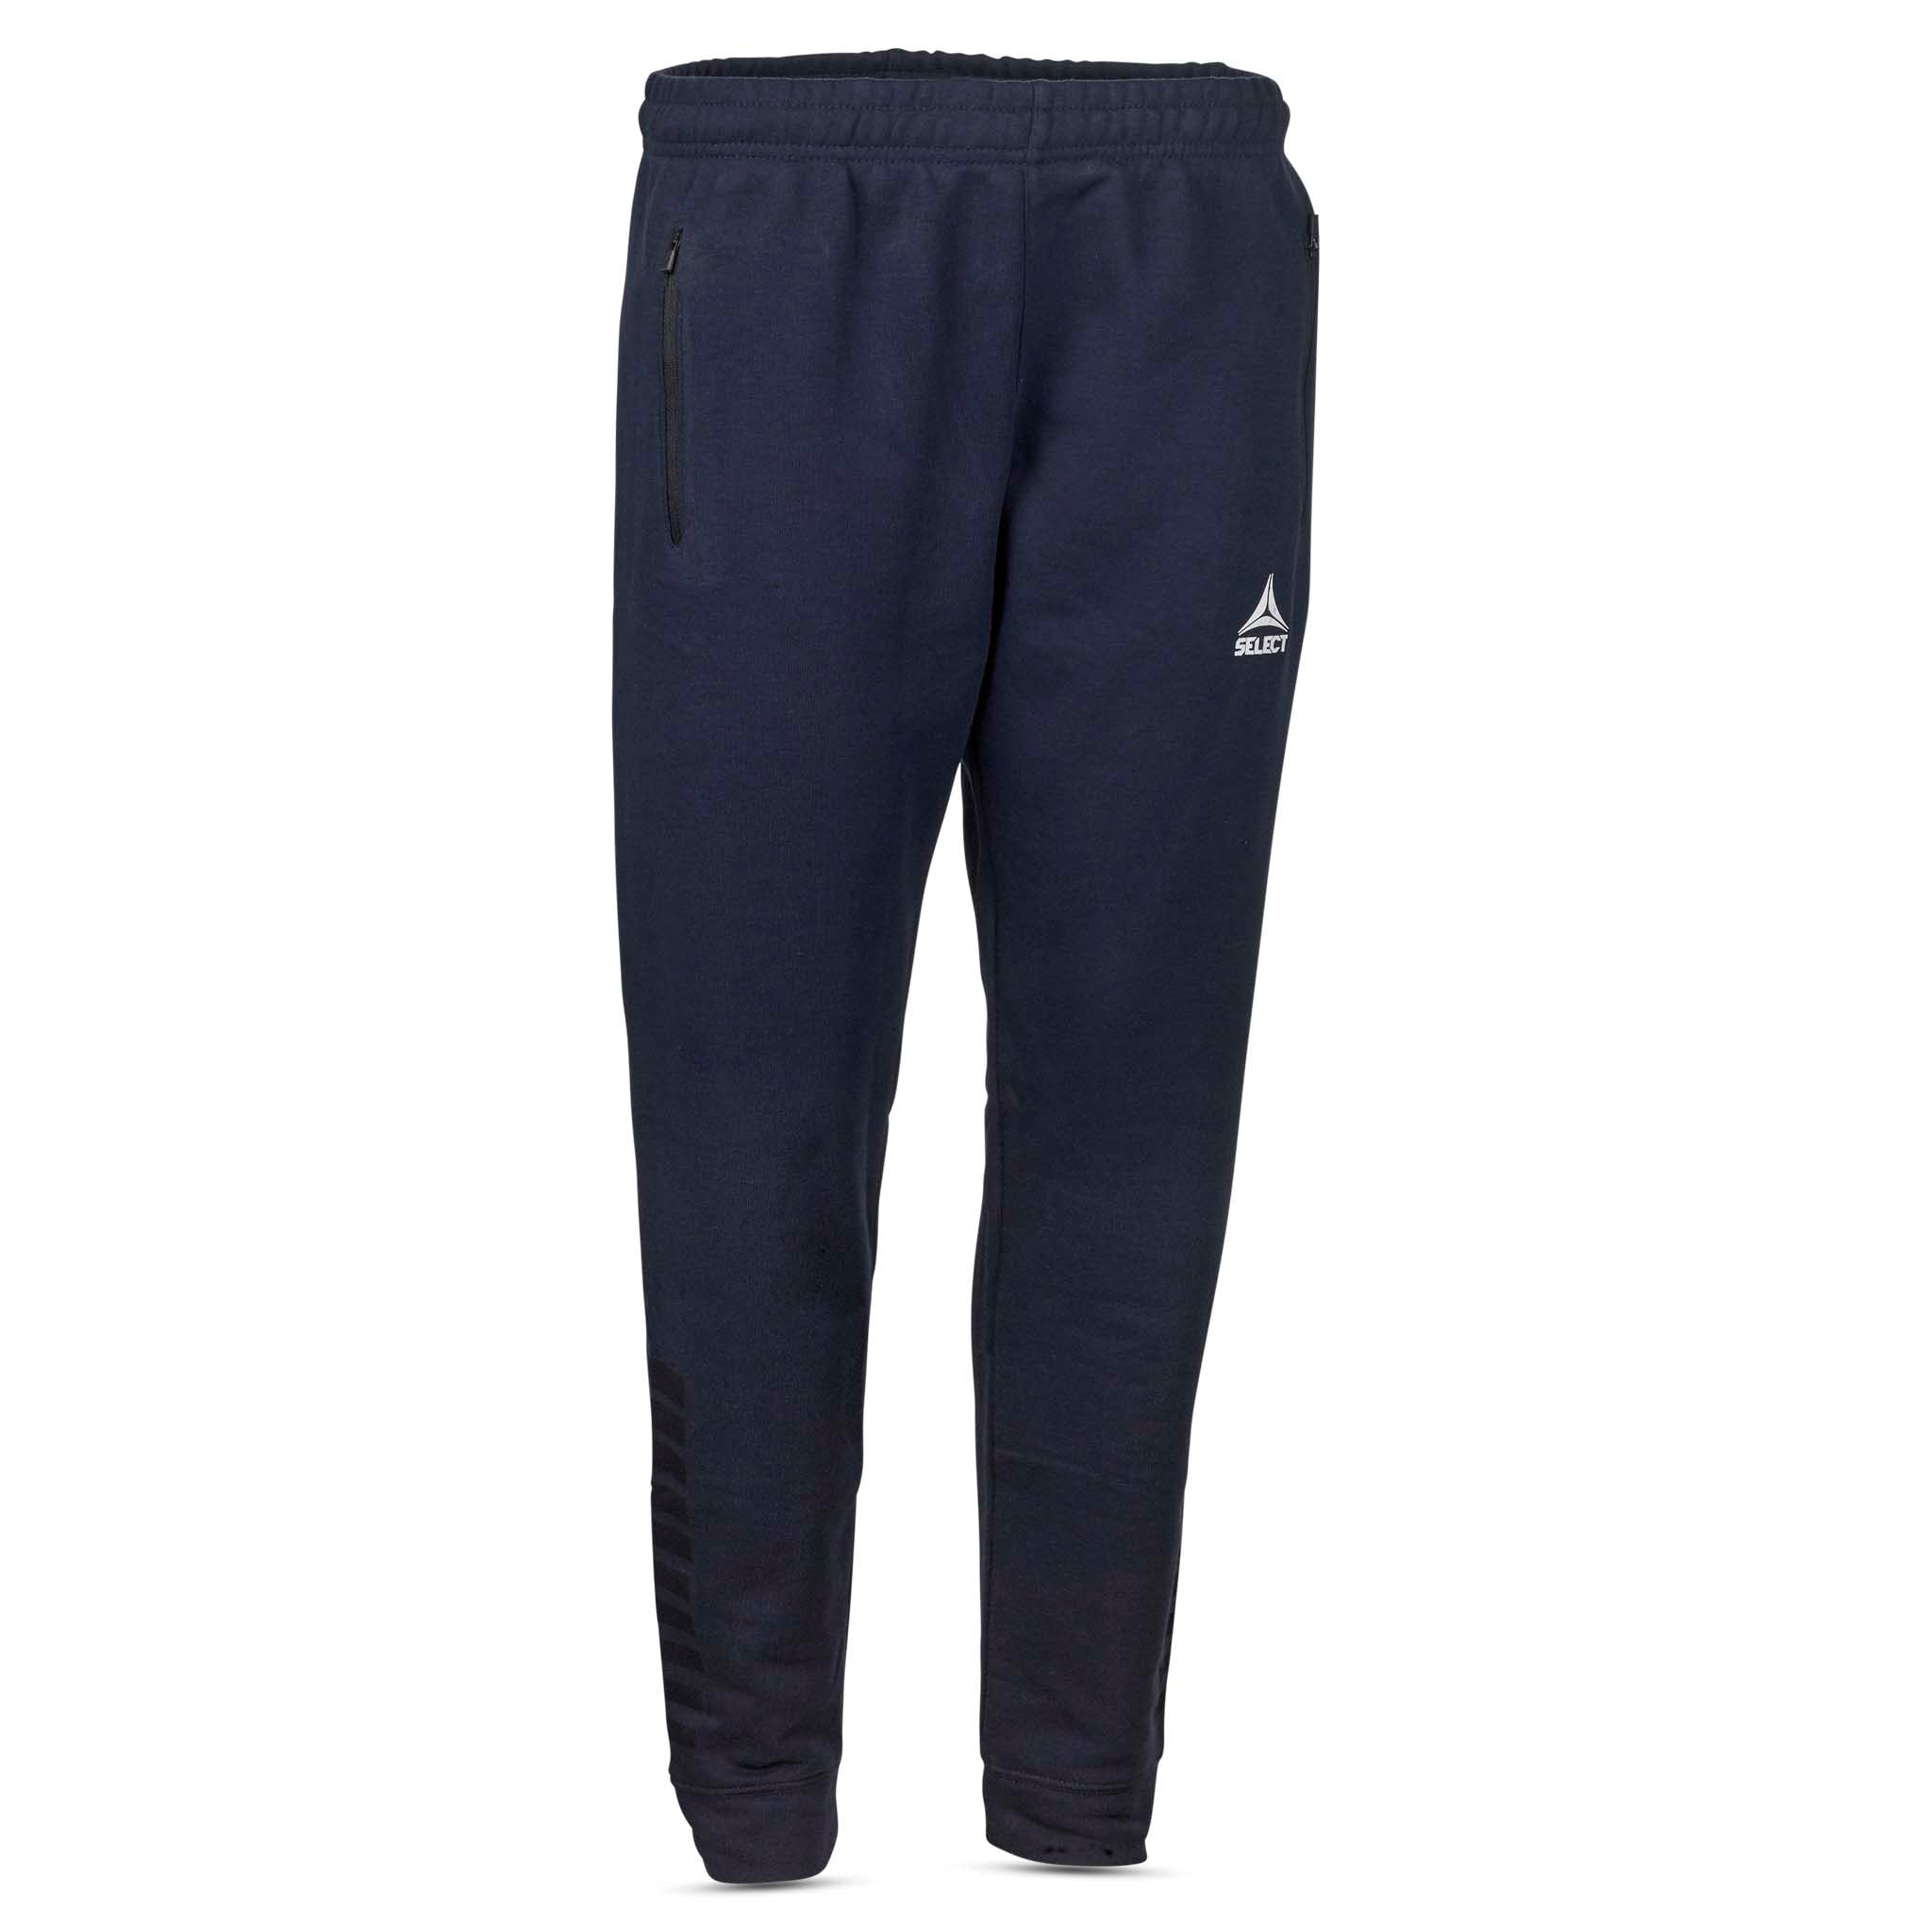 Shop Boys Pants Online - FREE* Shipping & Easy Returns - City Beach United  States